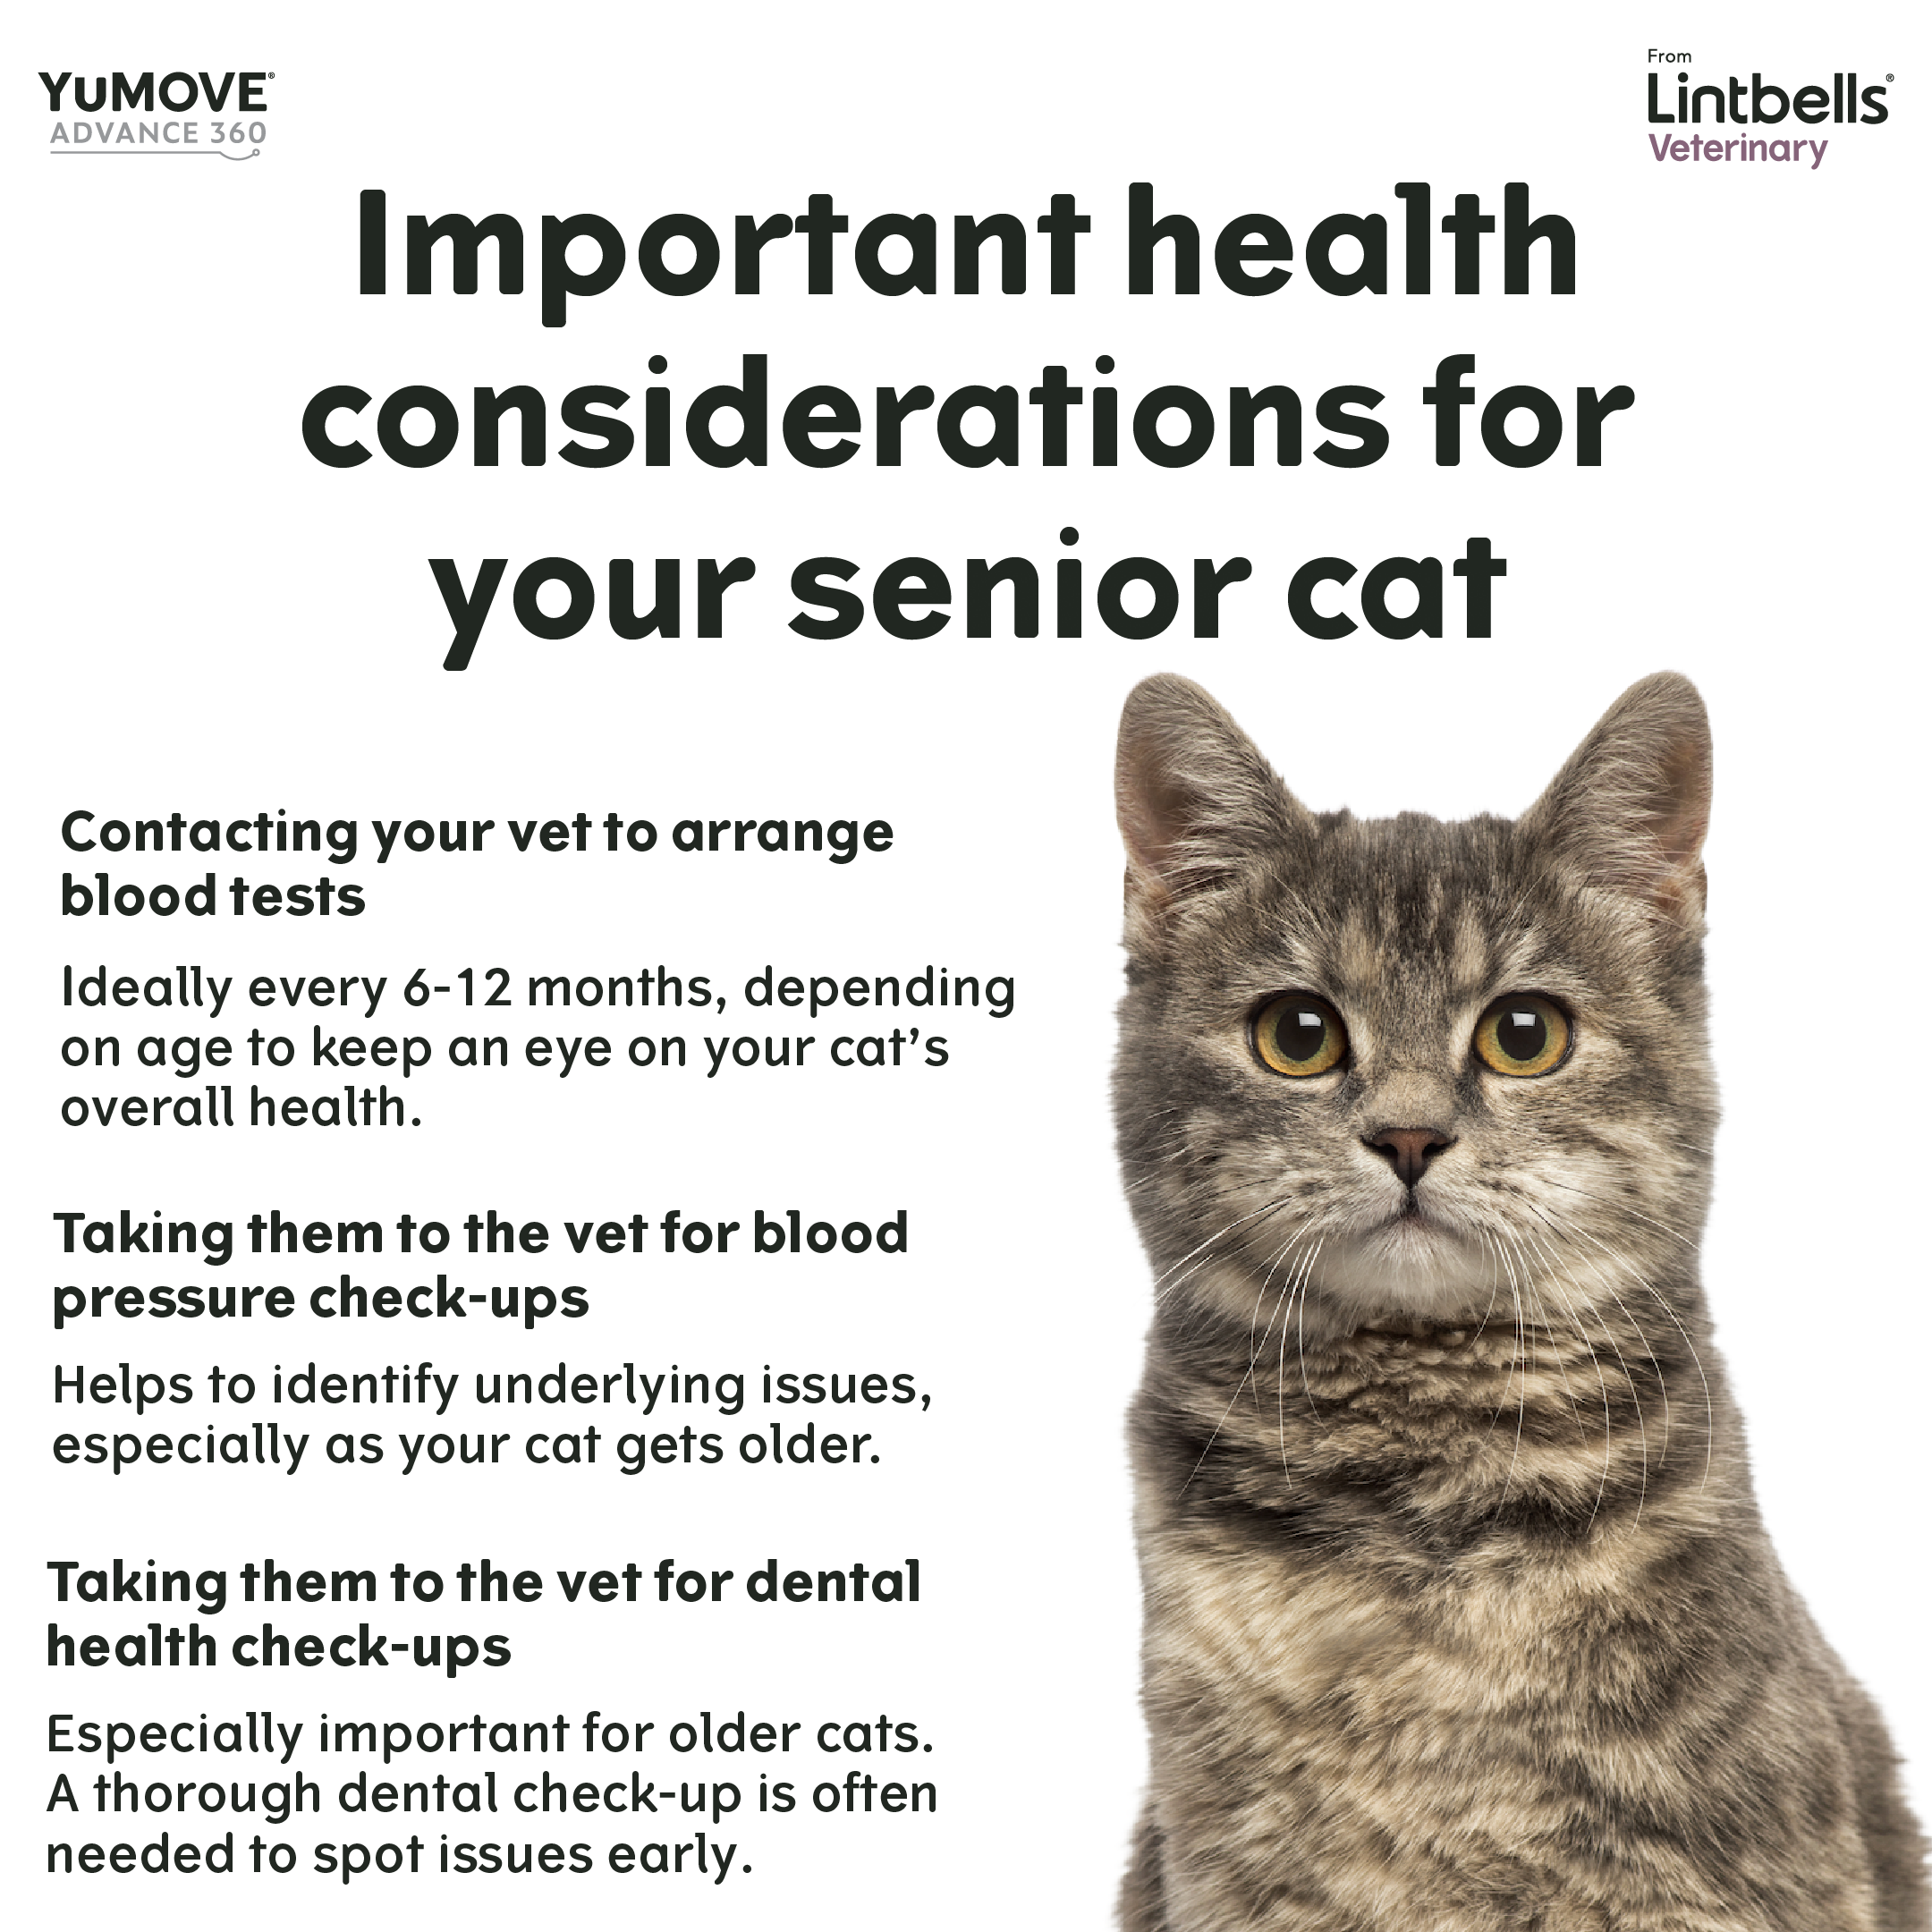 An infographic from Lintbells Veterinary, titled "Important health considerations for your senior cat", advises contacting a vet for blood tests every 6-12 months, blood pressure check-ups to identify underlying issues, and dental health check-ups to spot issues early. A grey tabby cat is partially visible.